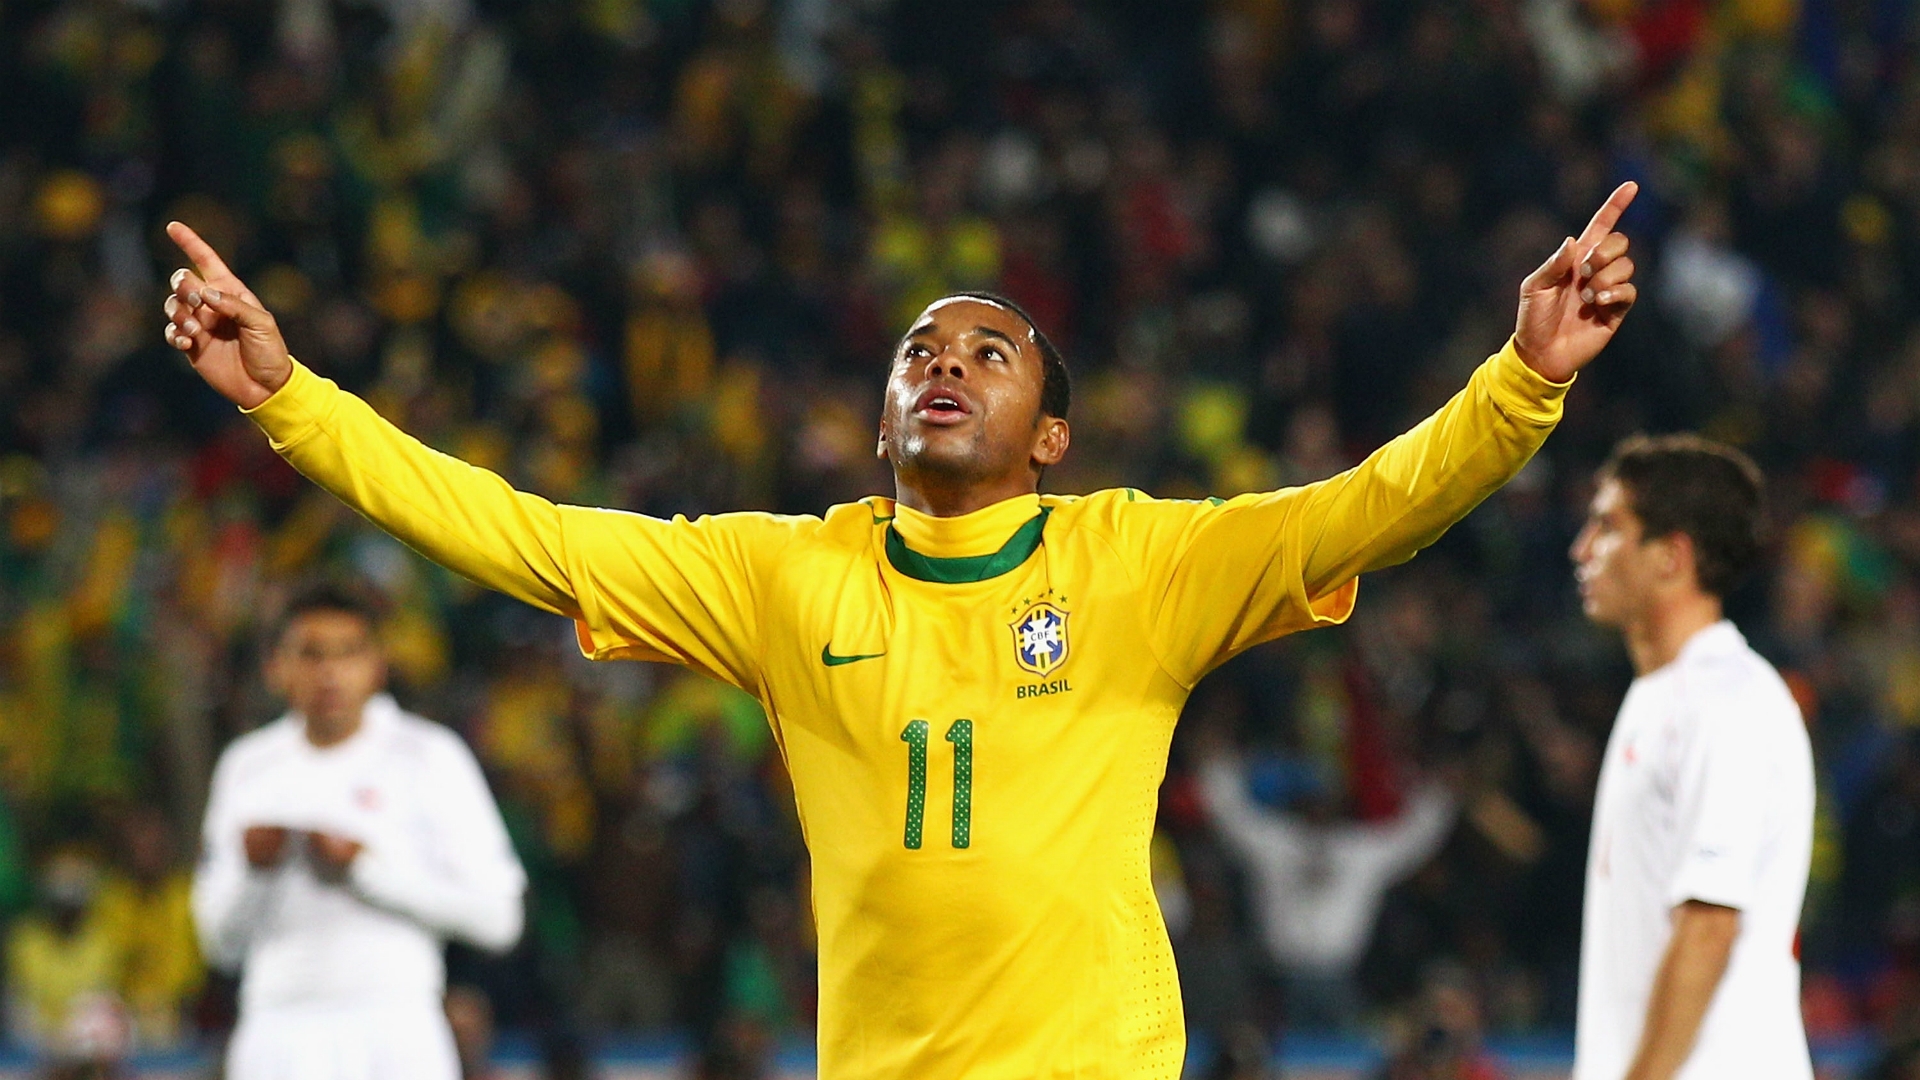 Robinho - the former Brazil internaitonal is one of the players chosen this week by our fantasy football scout